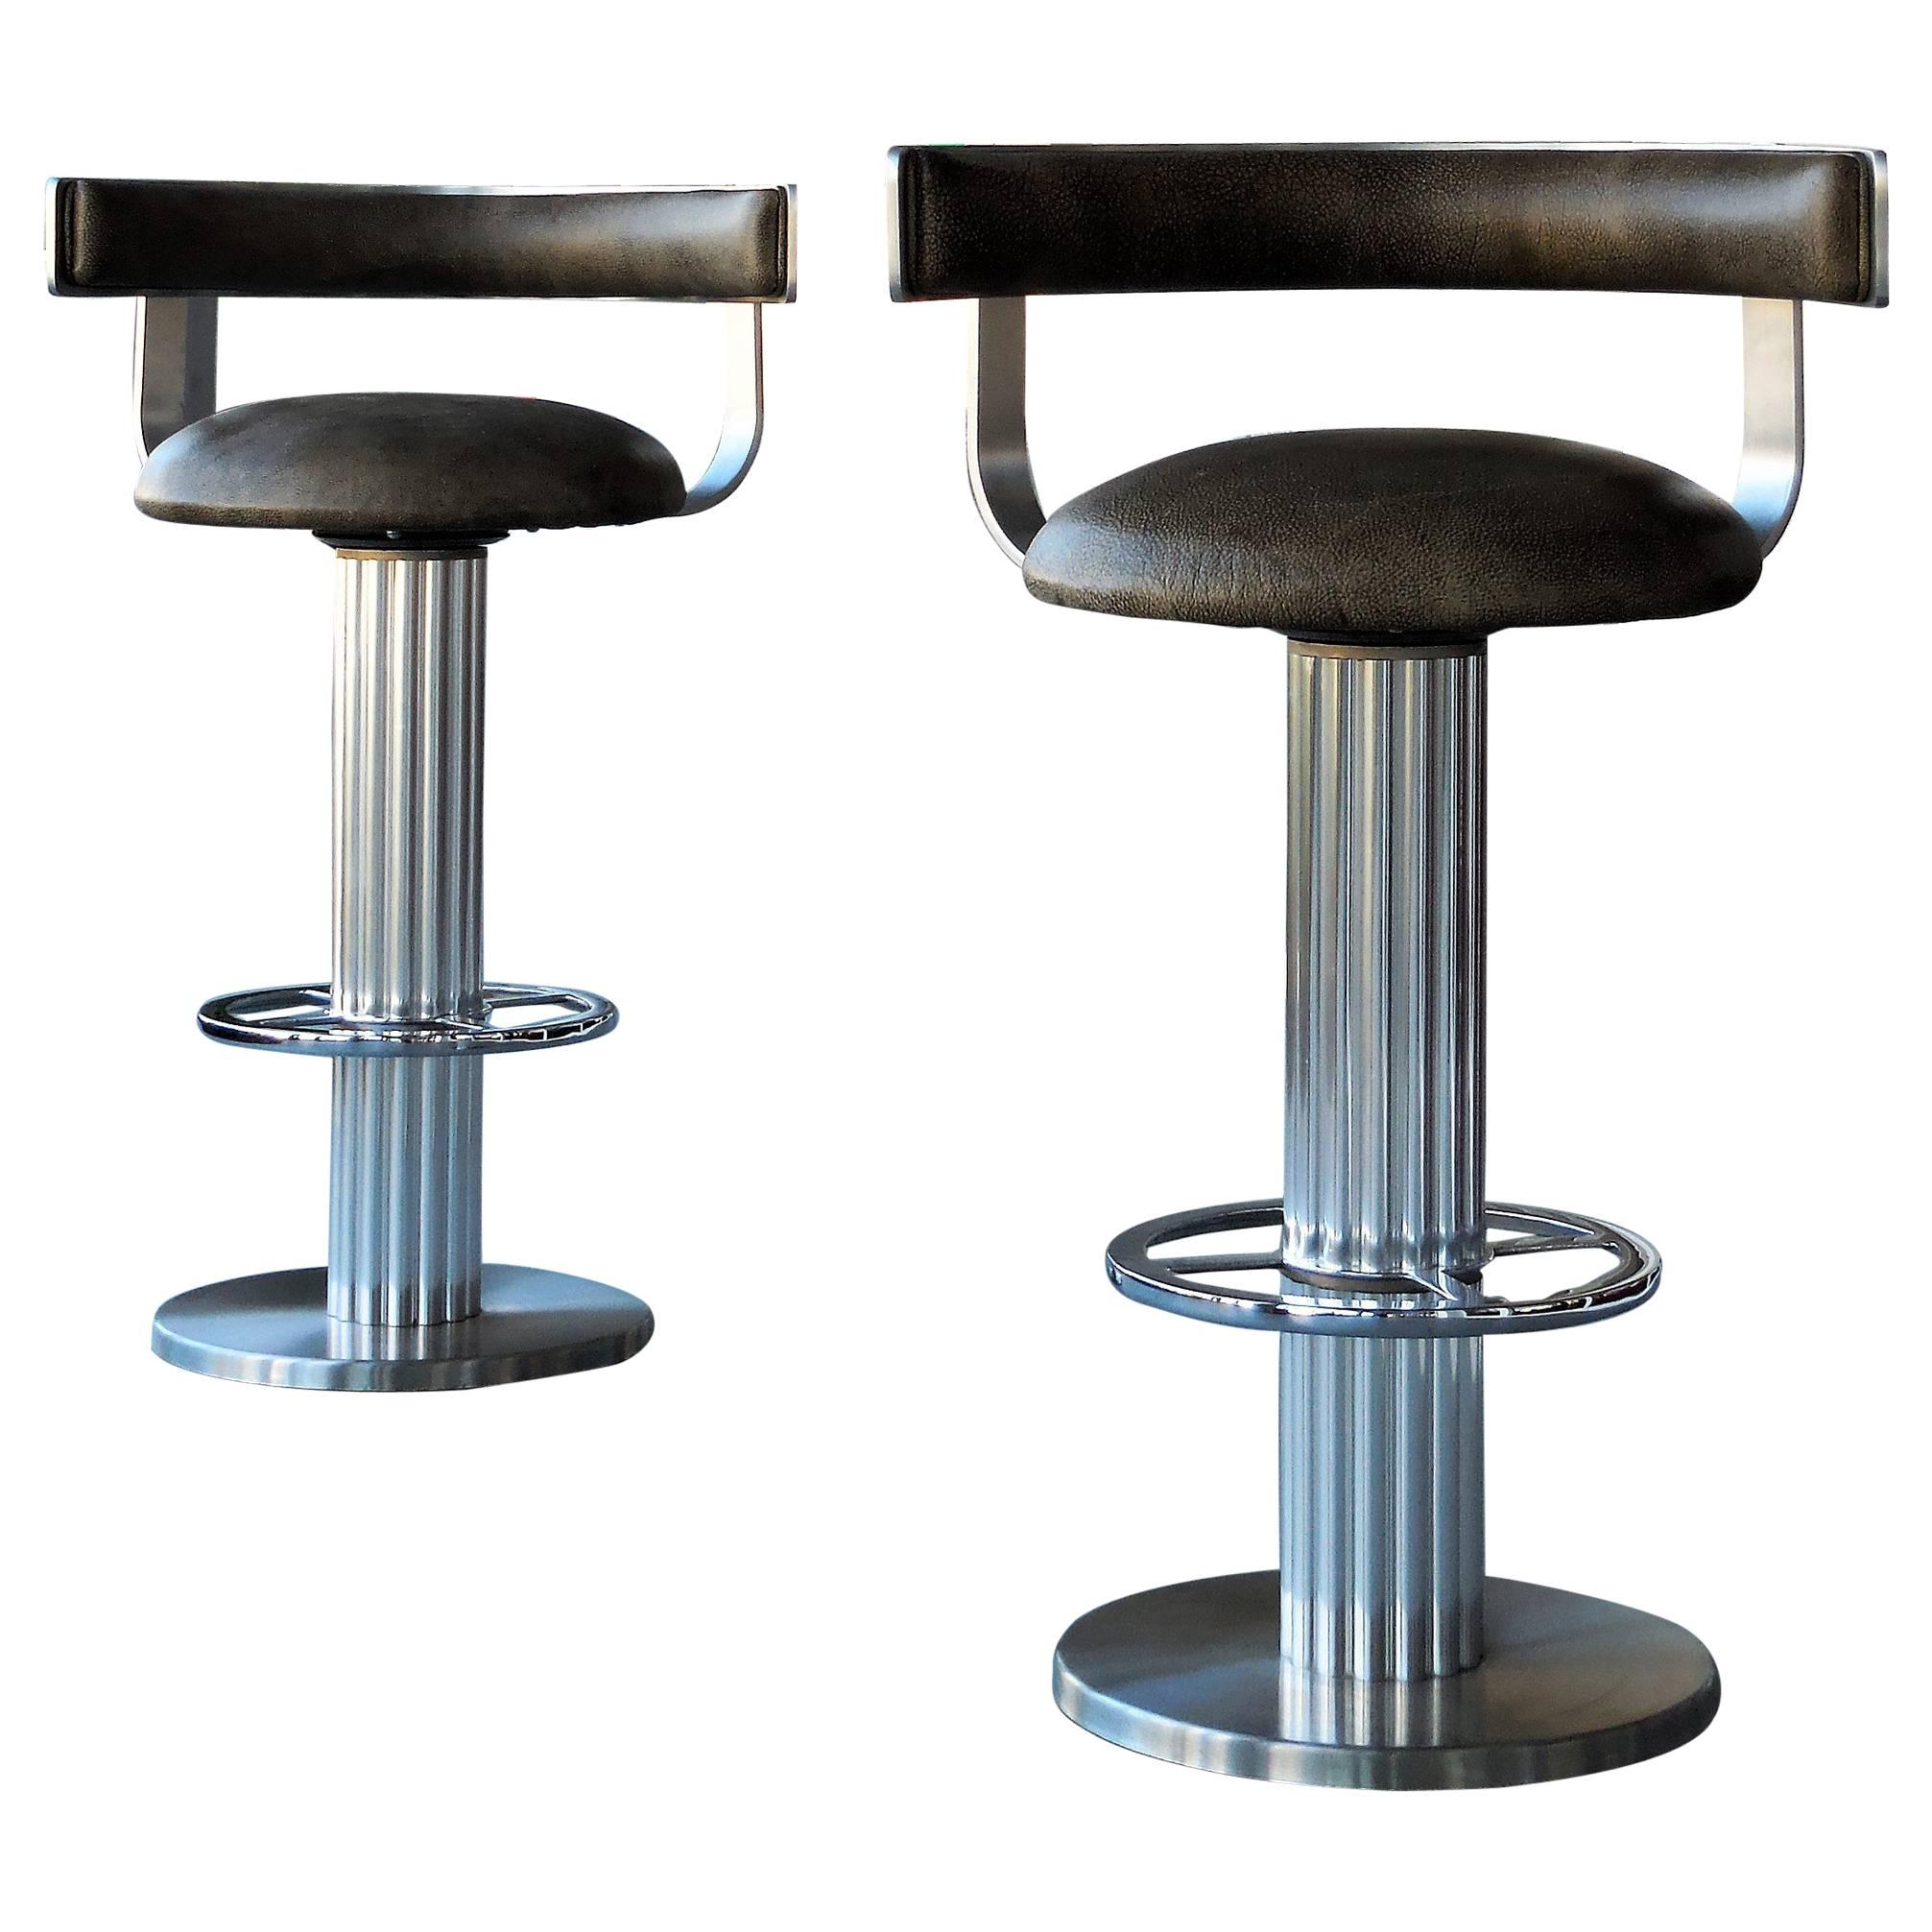 Design For Leisure Swivel Leather Bar Stools, Pair